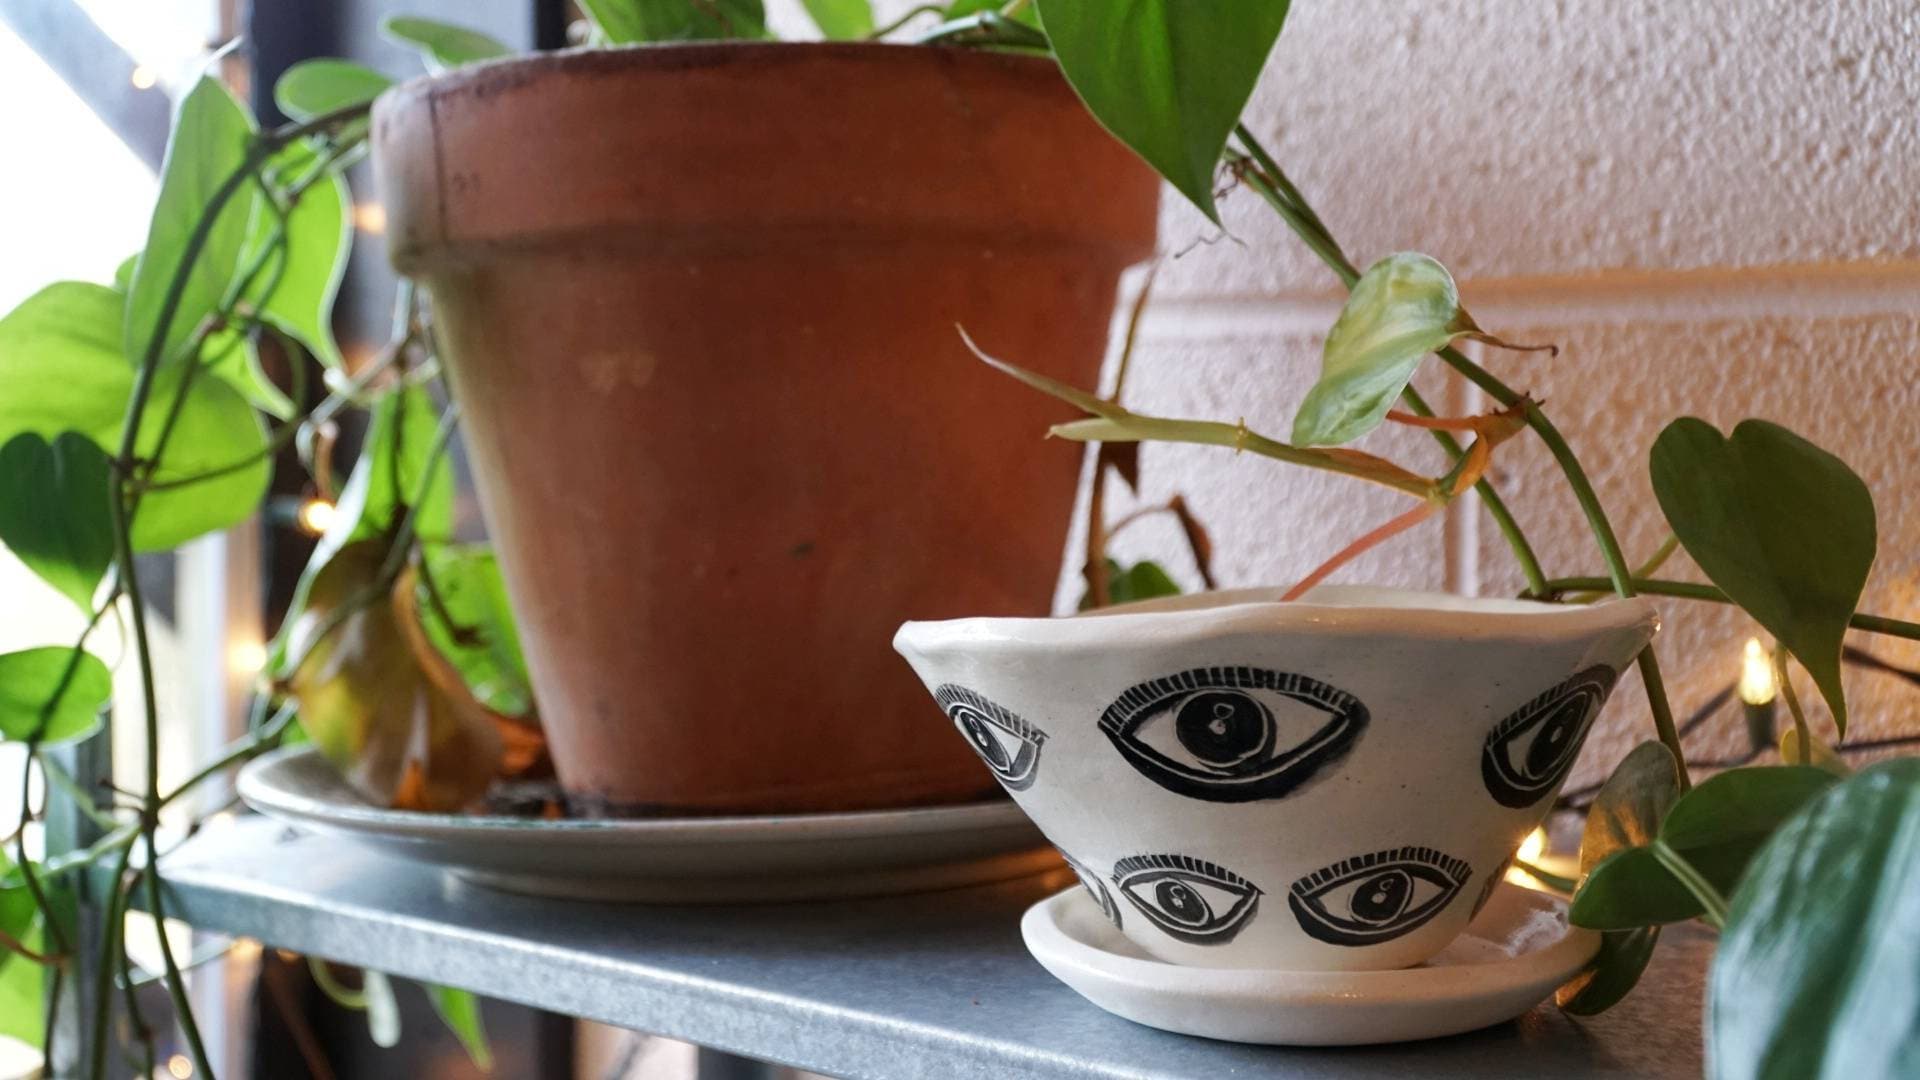 Black & White Glazed Table Planter w/ “Eye” Design - Matching Tray - Small Indoor Planter - Succulent, Cacti, Small Plant Pot - Indoor Garden - Modern Plant